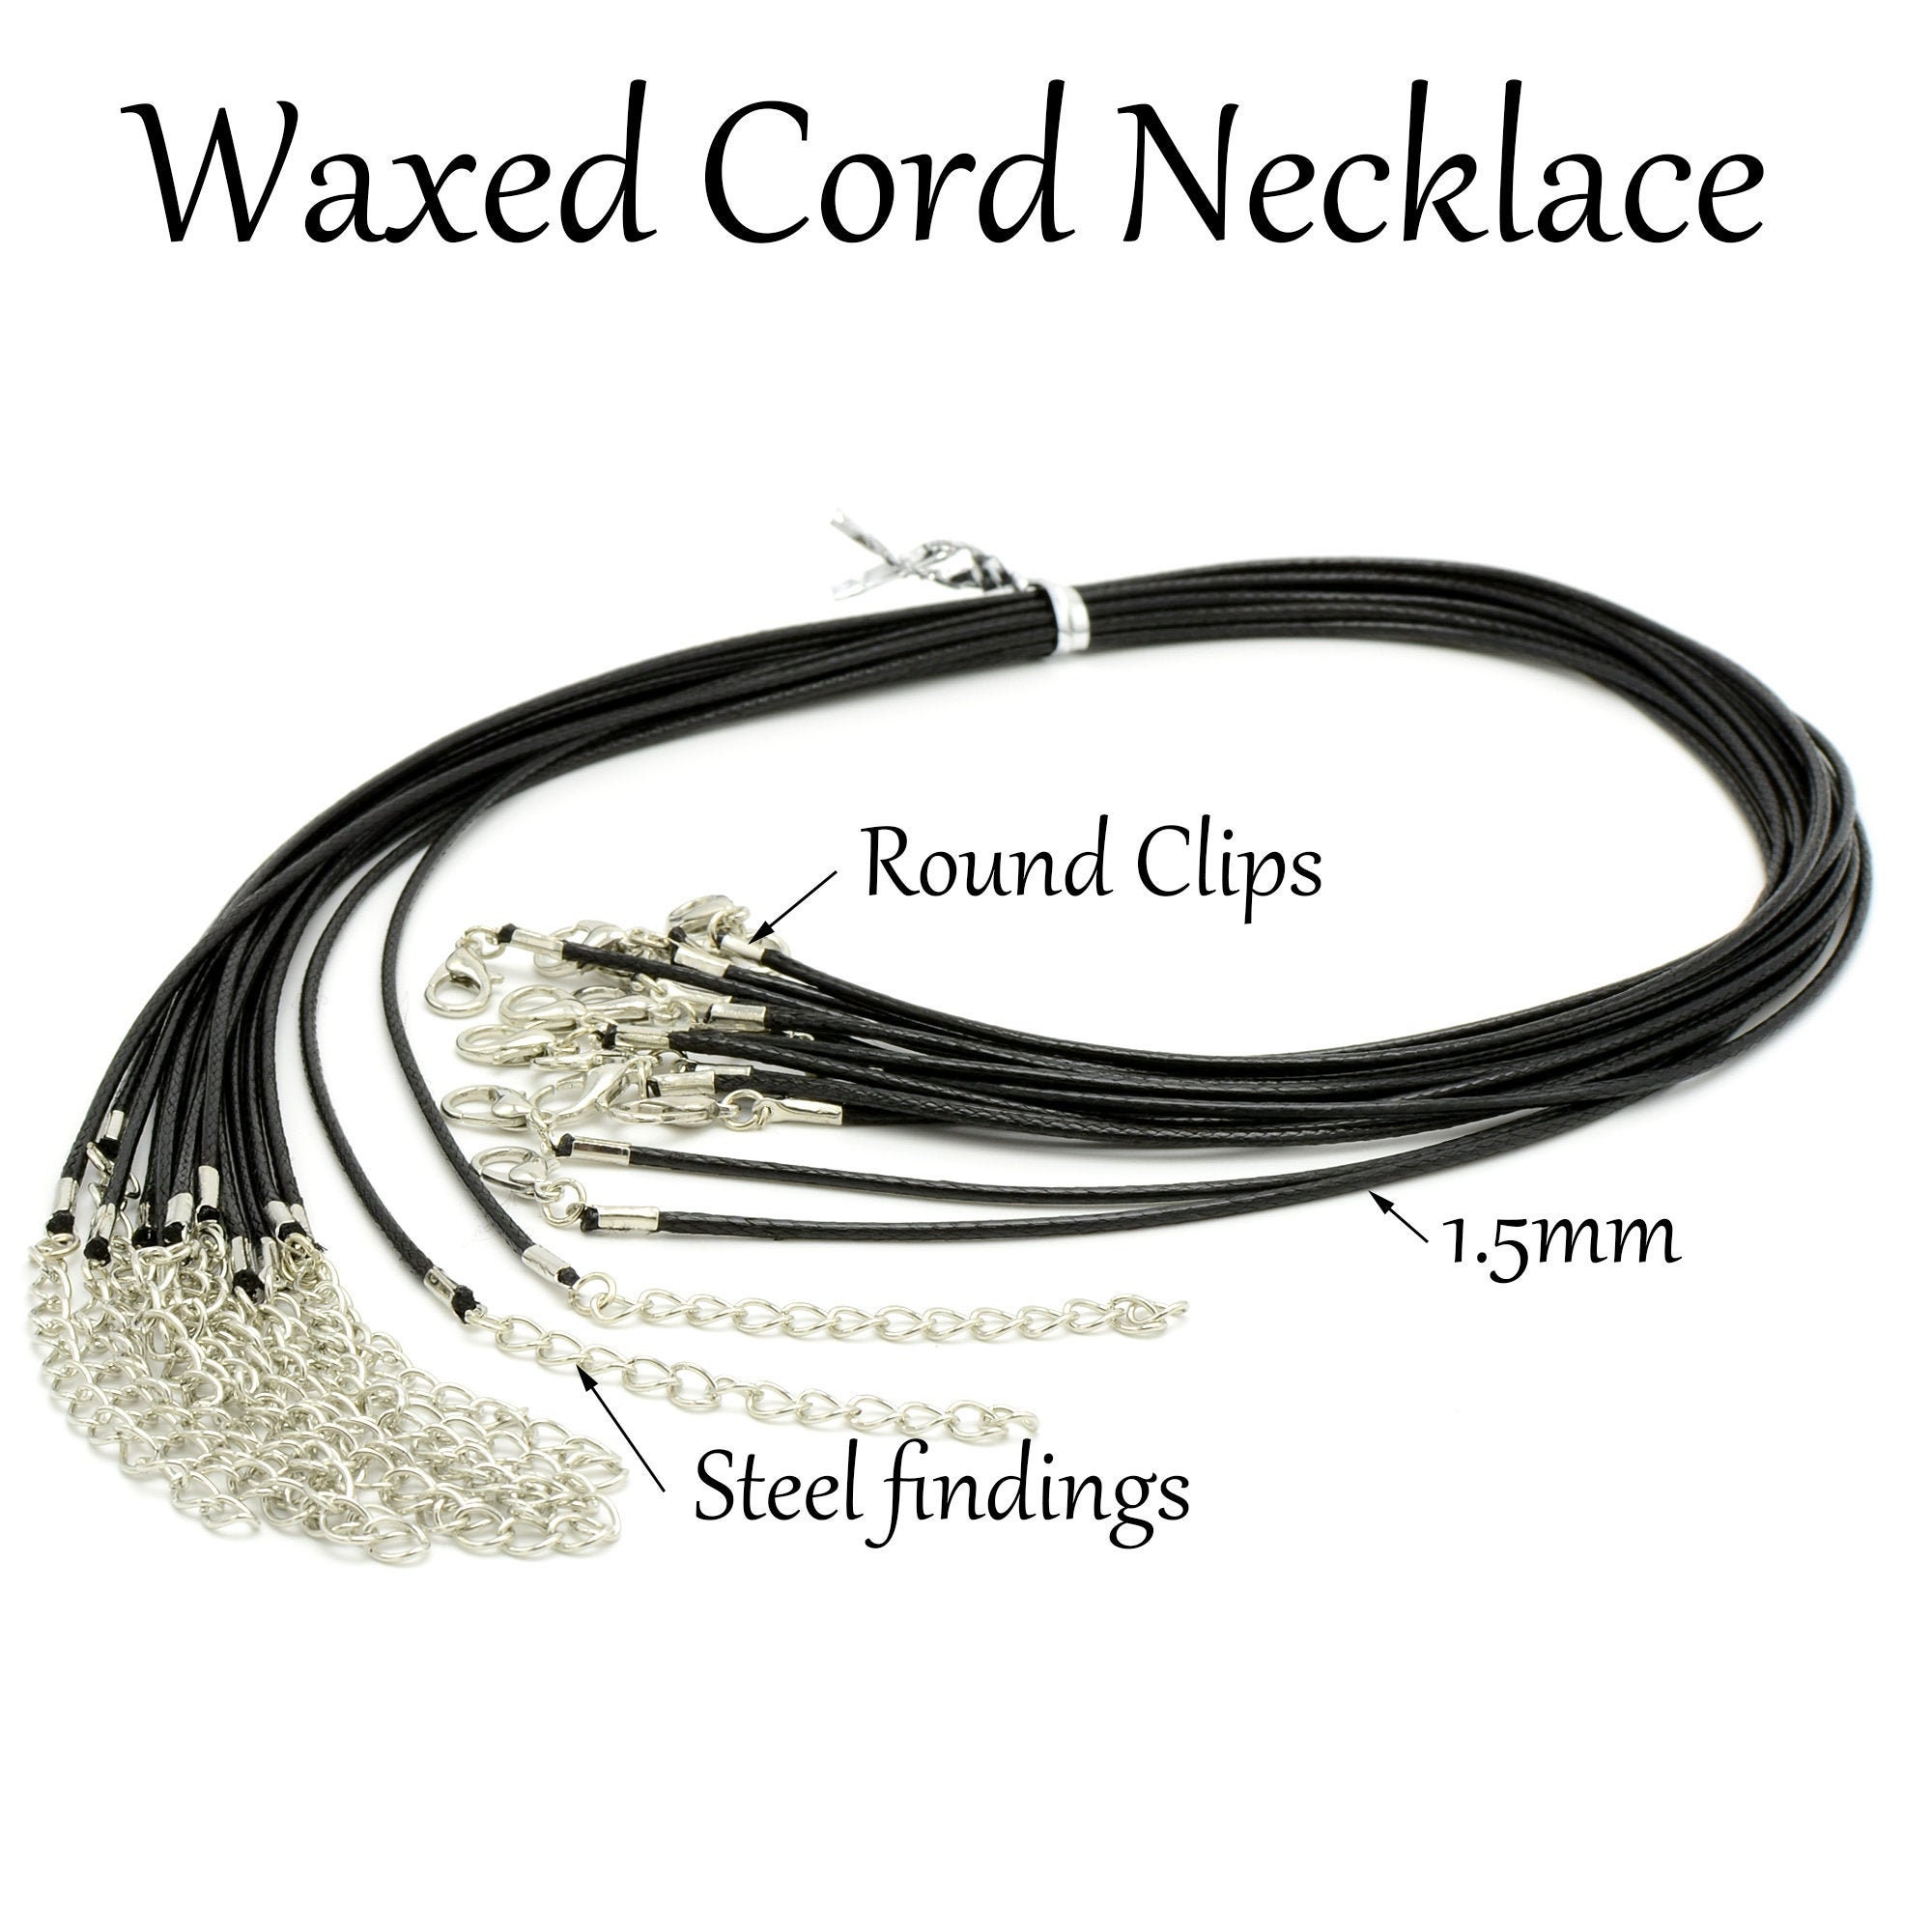  200 Pieces Waxed Necklace Cords with Clasps Bulk Necklace  String Cords for Jewelry Making Pendants DIY Bracelet Supplies (Earth Tone  Color)